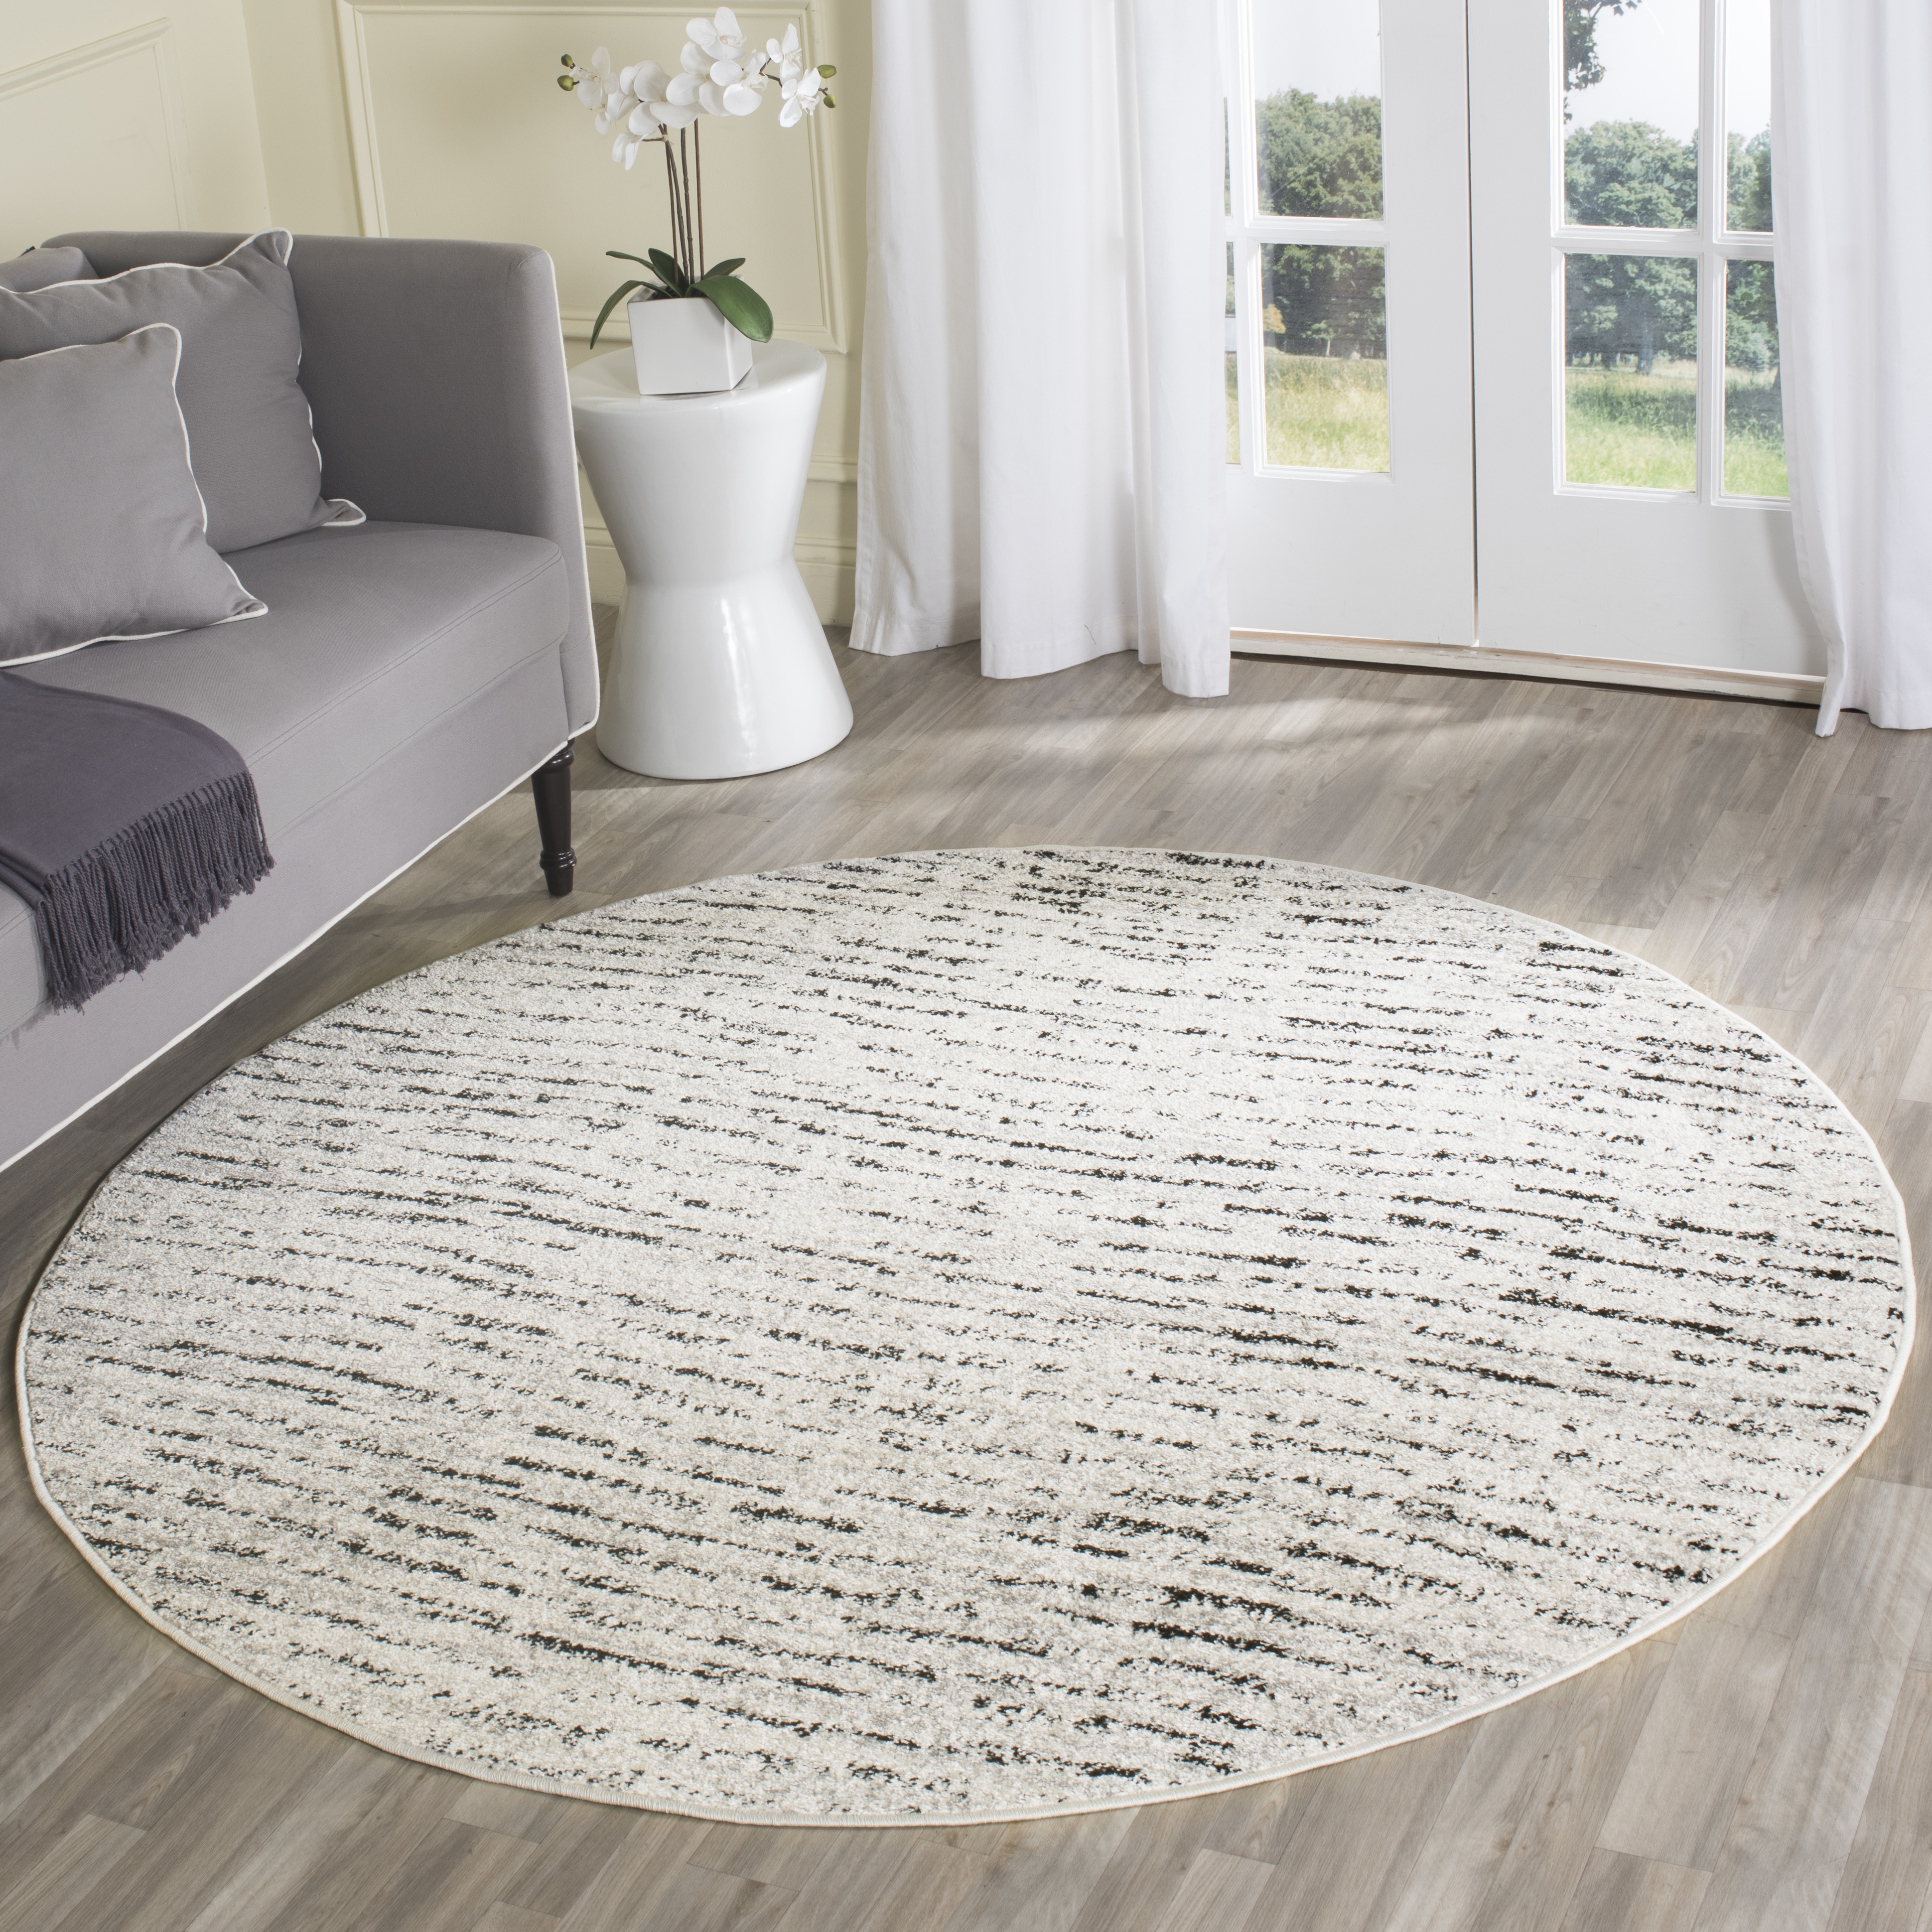 Arlo Home Woven Area Rug, ADR117B, Ivory/Silver,  6' X 6' Round - Image 1